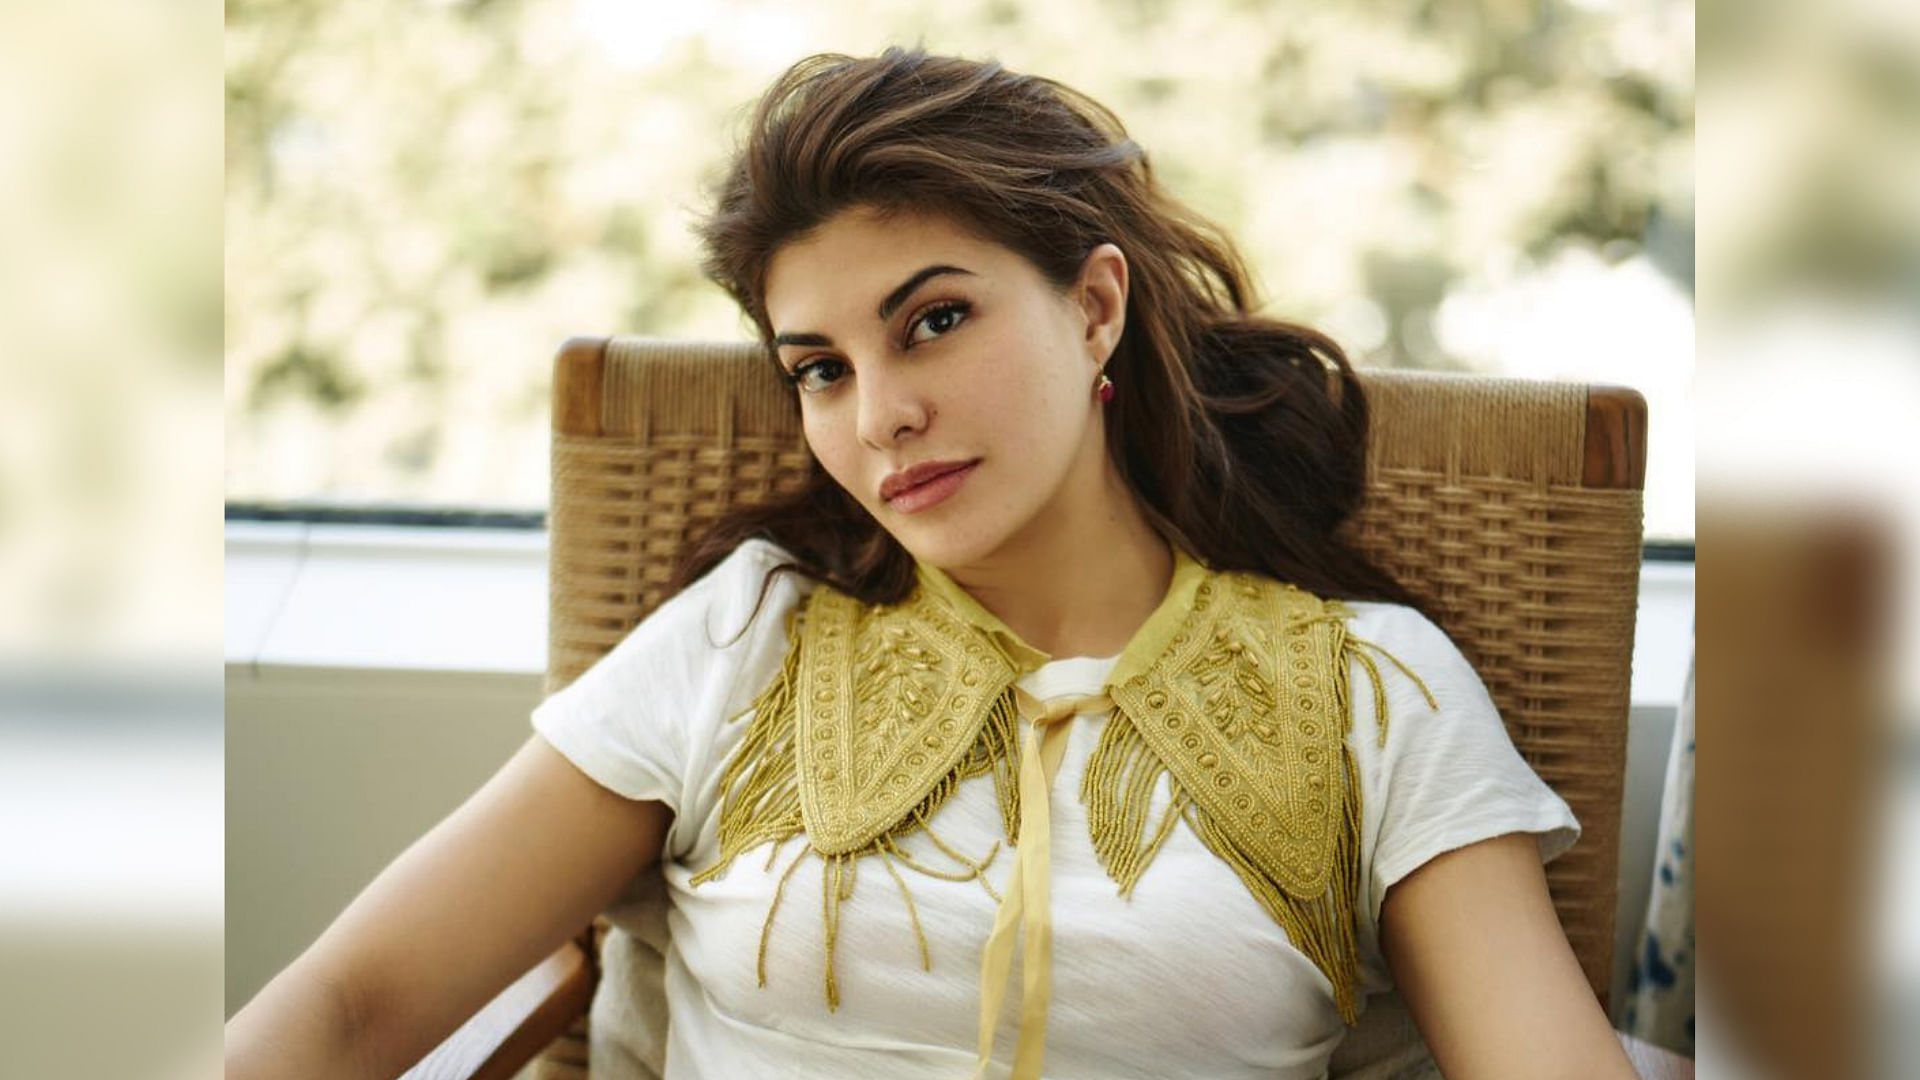 Jacqueline Fernandez has appealed to fans to support Sri Lanka after the Easter Sunday blasts.&nbsp;